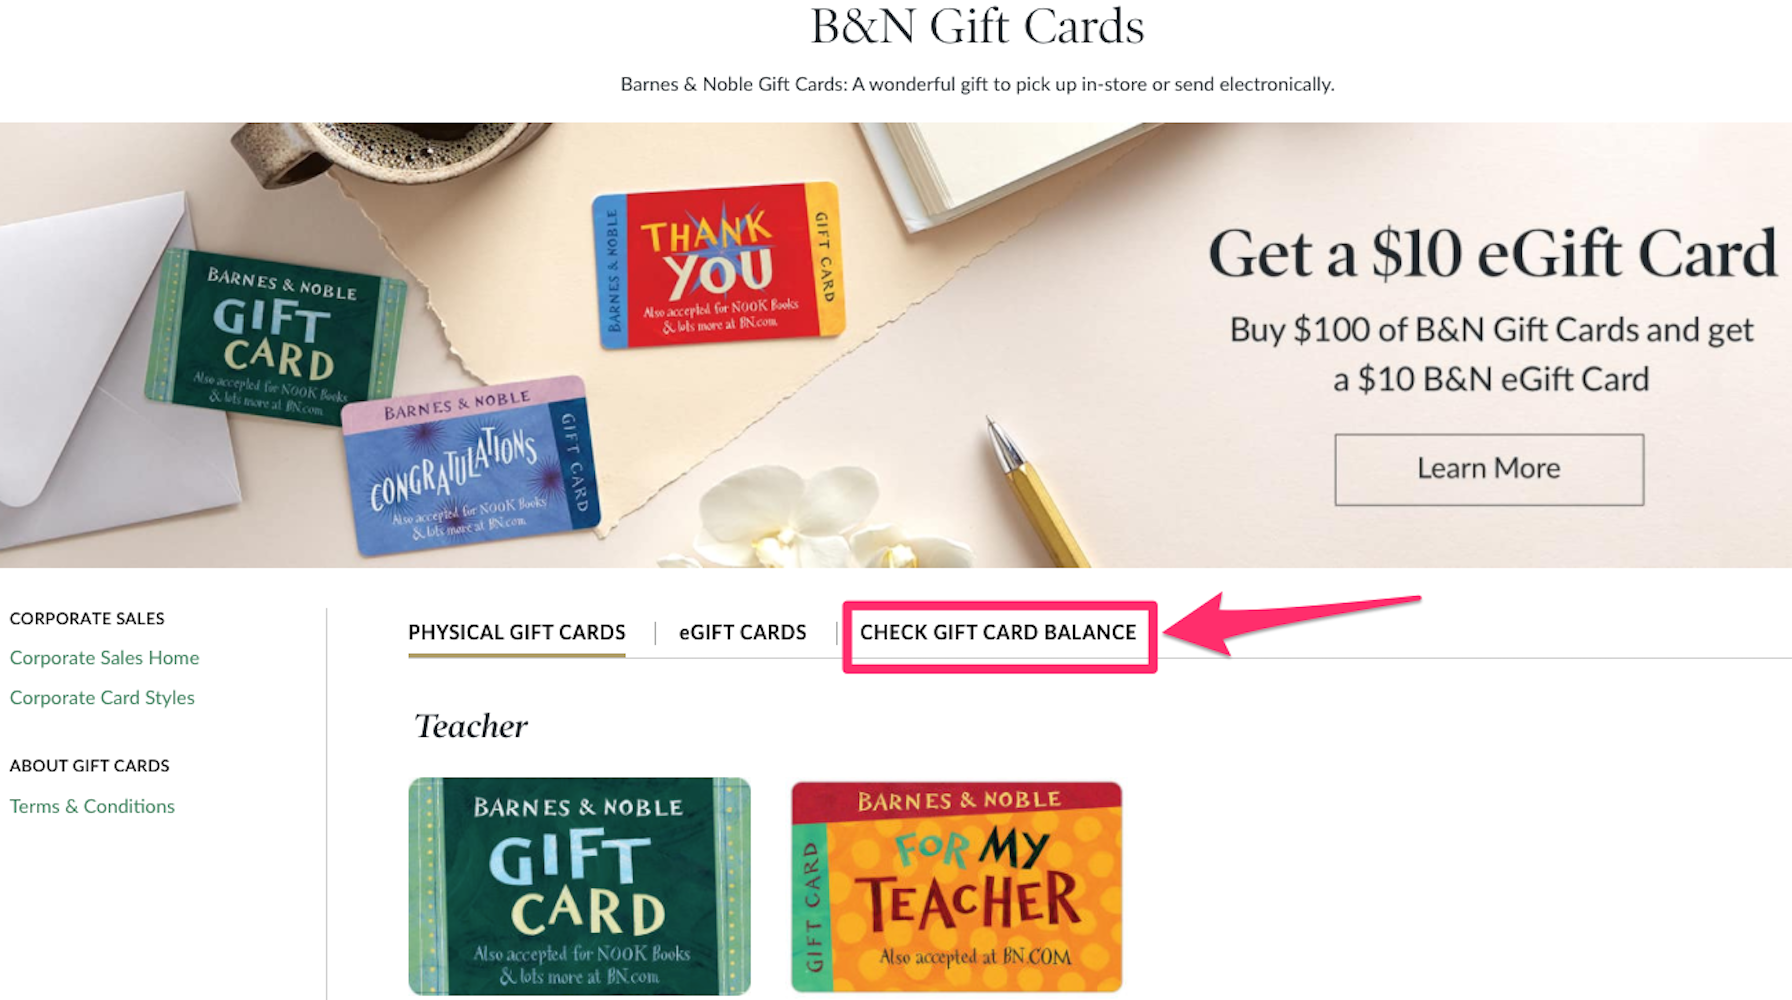 Screenshot of Barnes & Noble website gift cards page